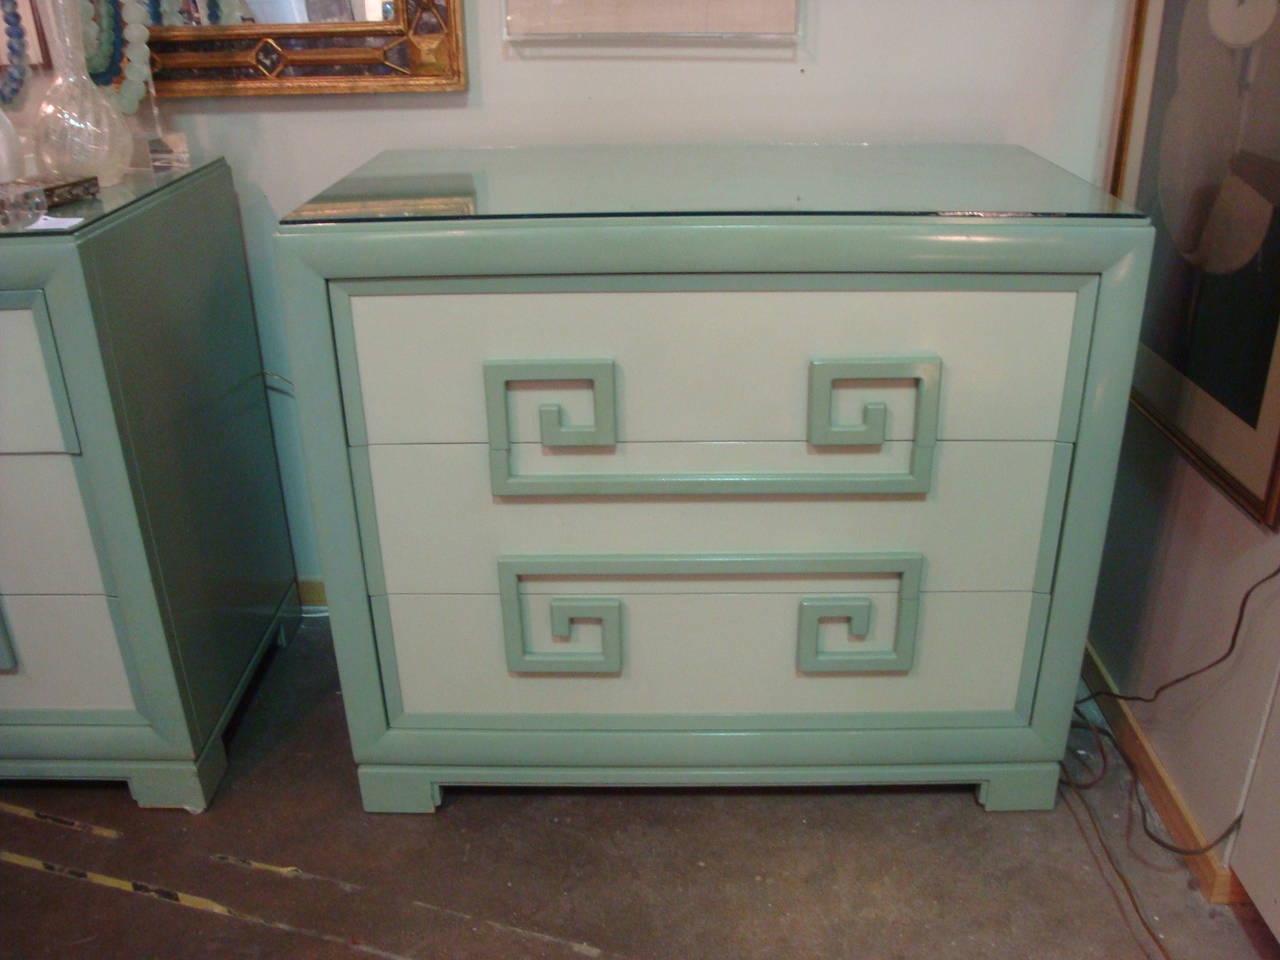 This is a pair of 1949 kittenger chests with original paint in excellent condition